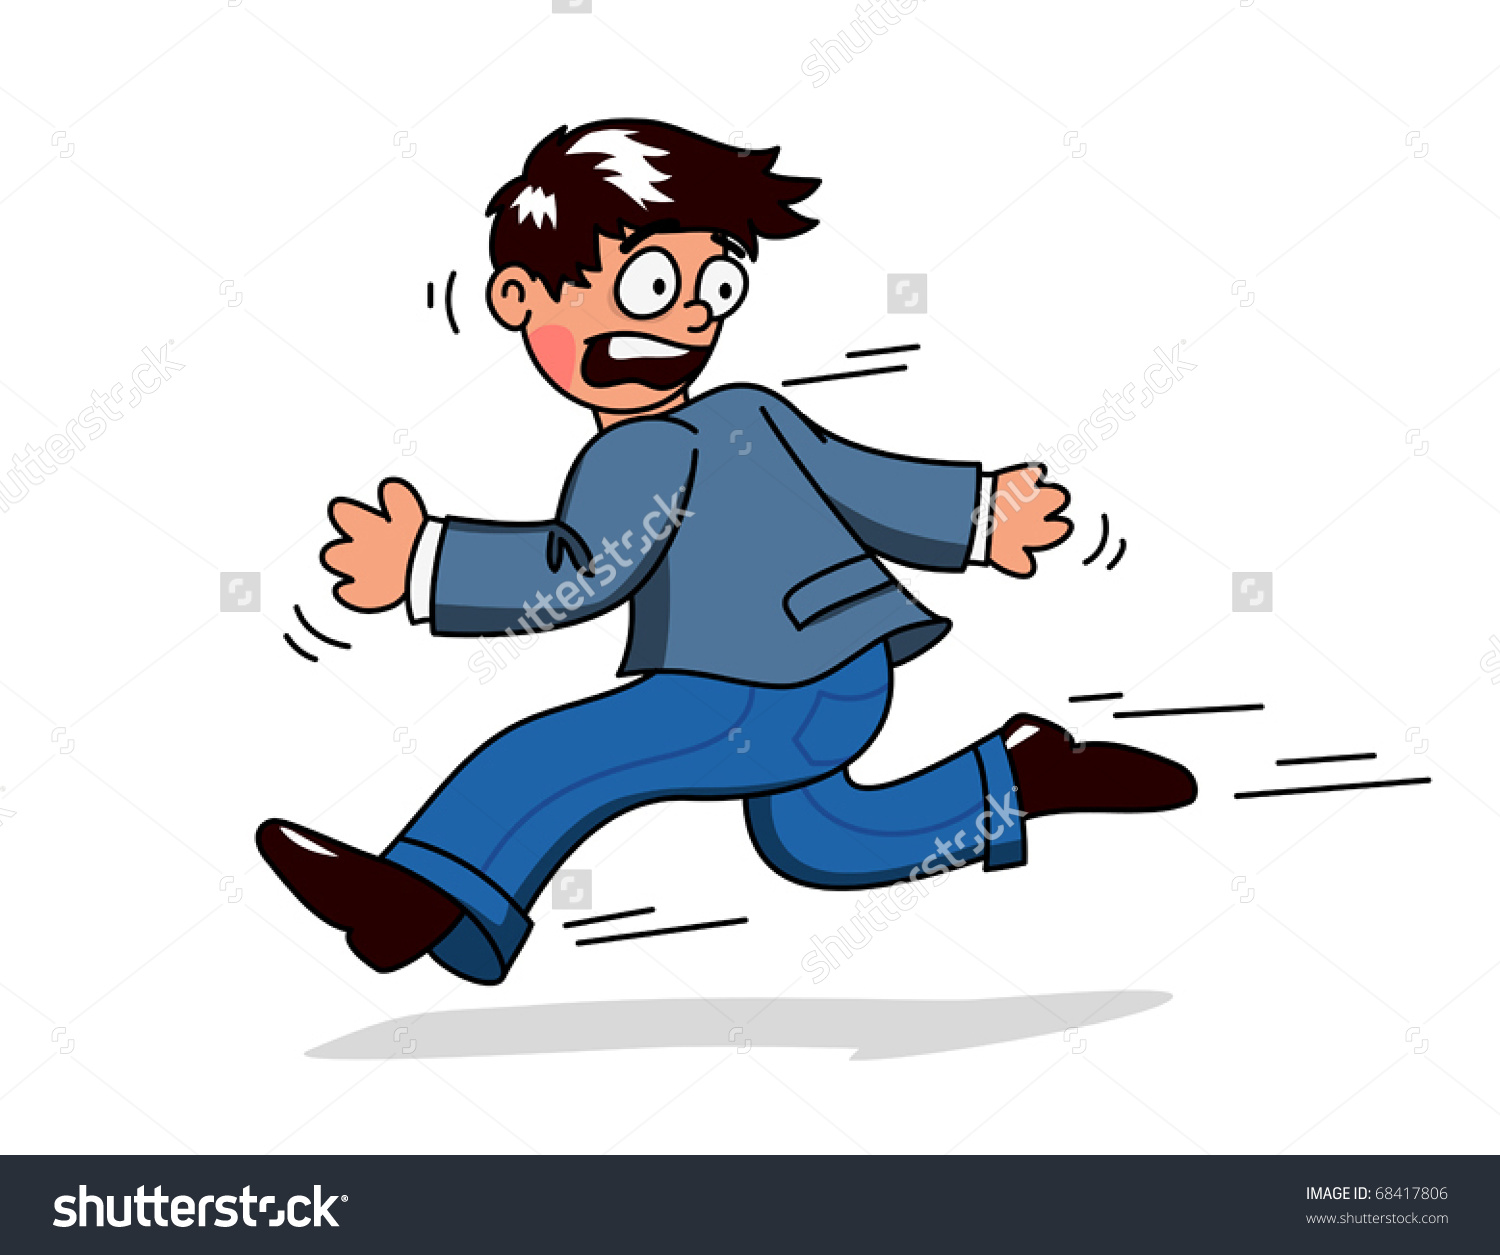 scared man running clipart - Clipground